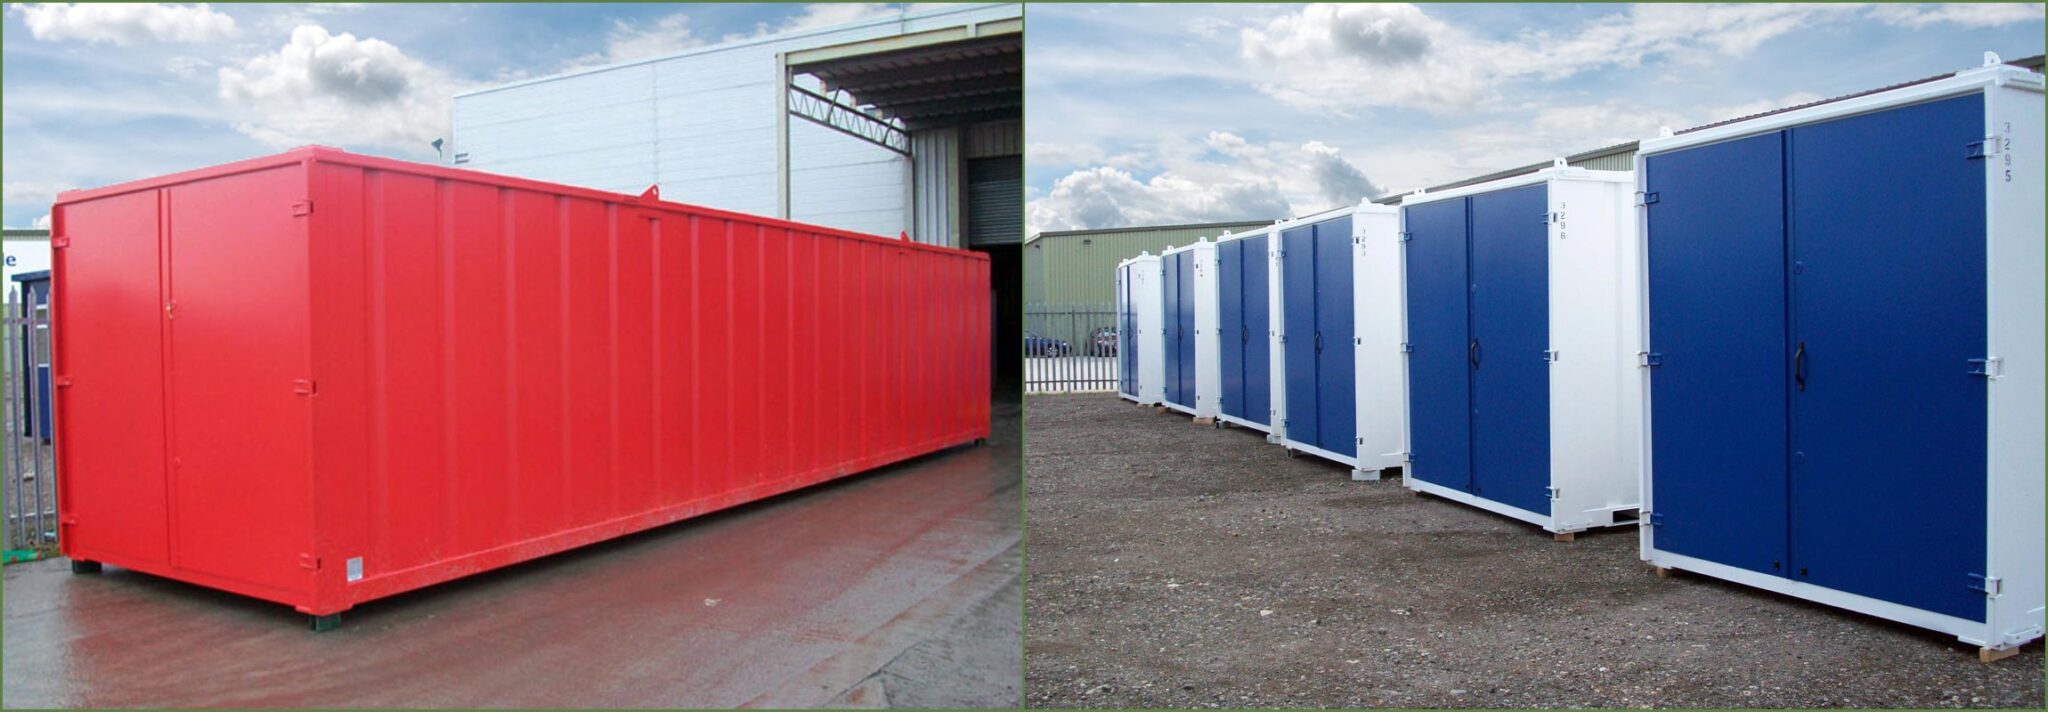 UK Suppliers of Factory Built Steel Storage Units